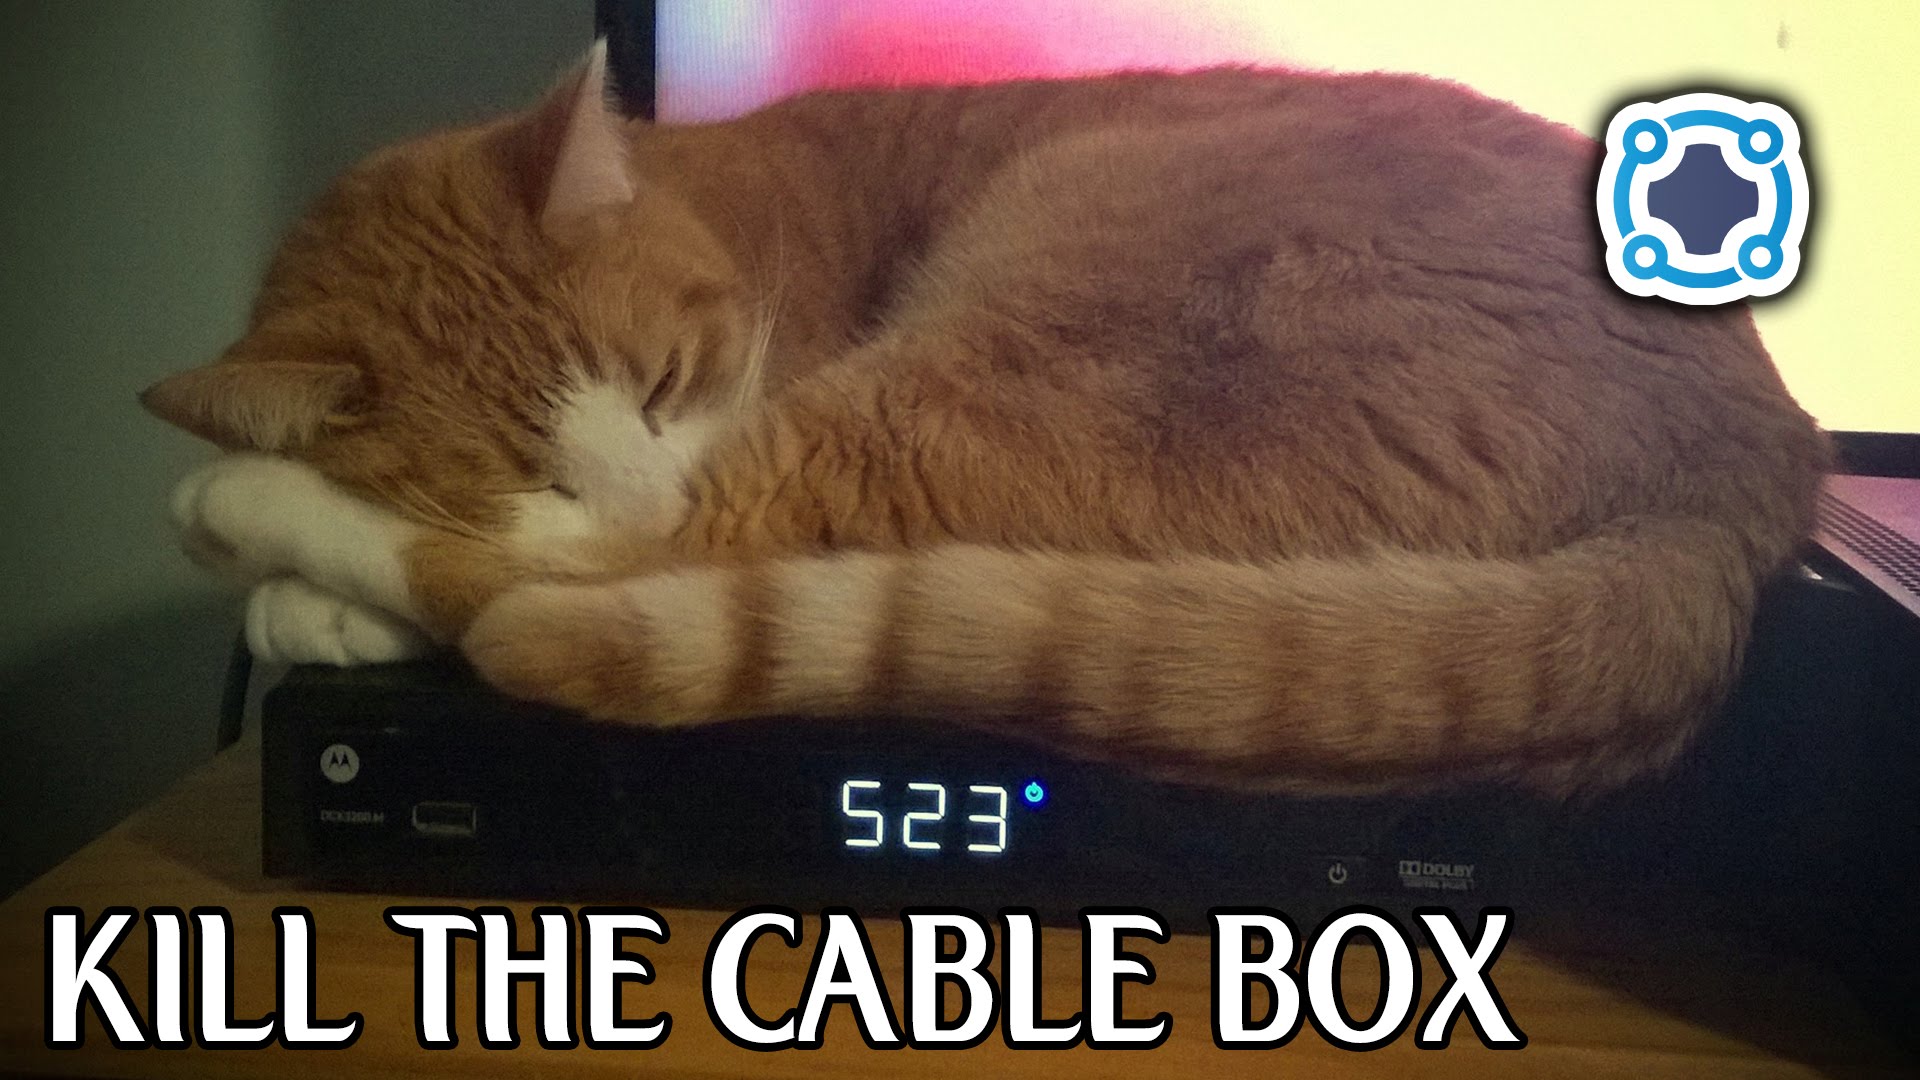 IT'S TIME TO KILL THE CABLE BOX